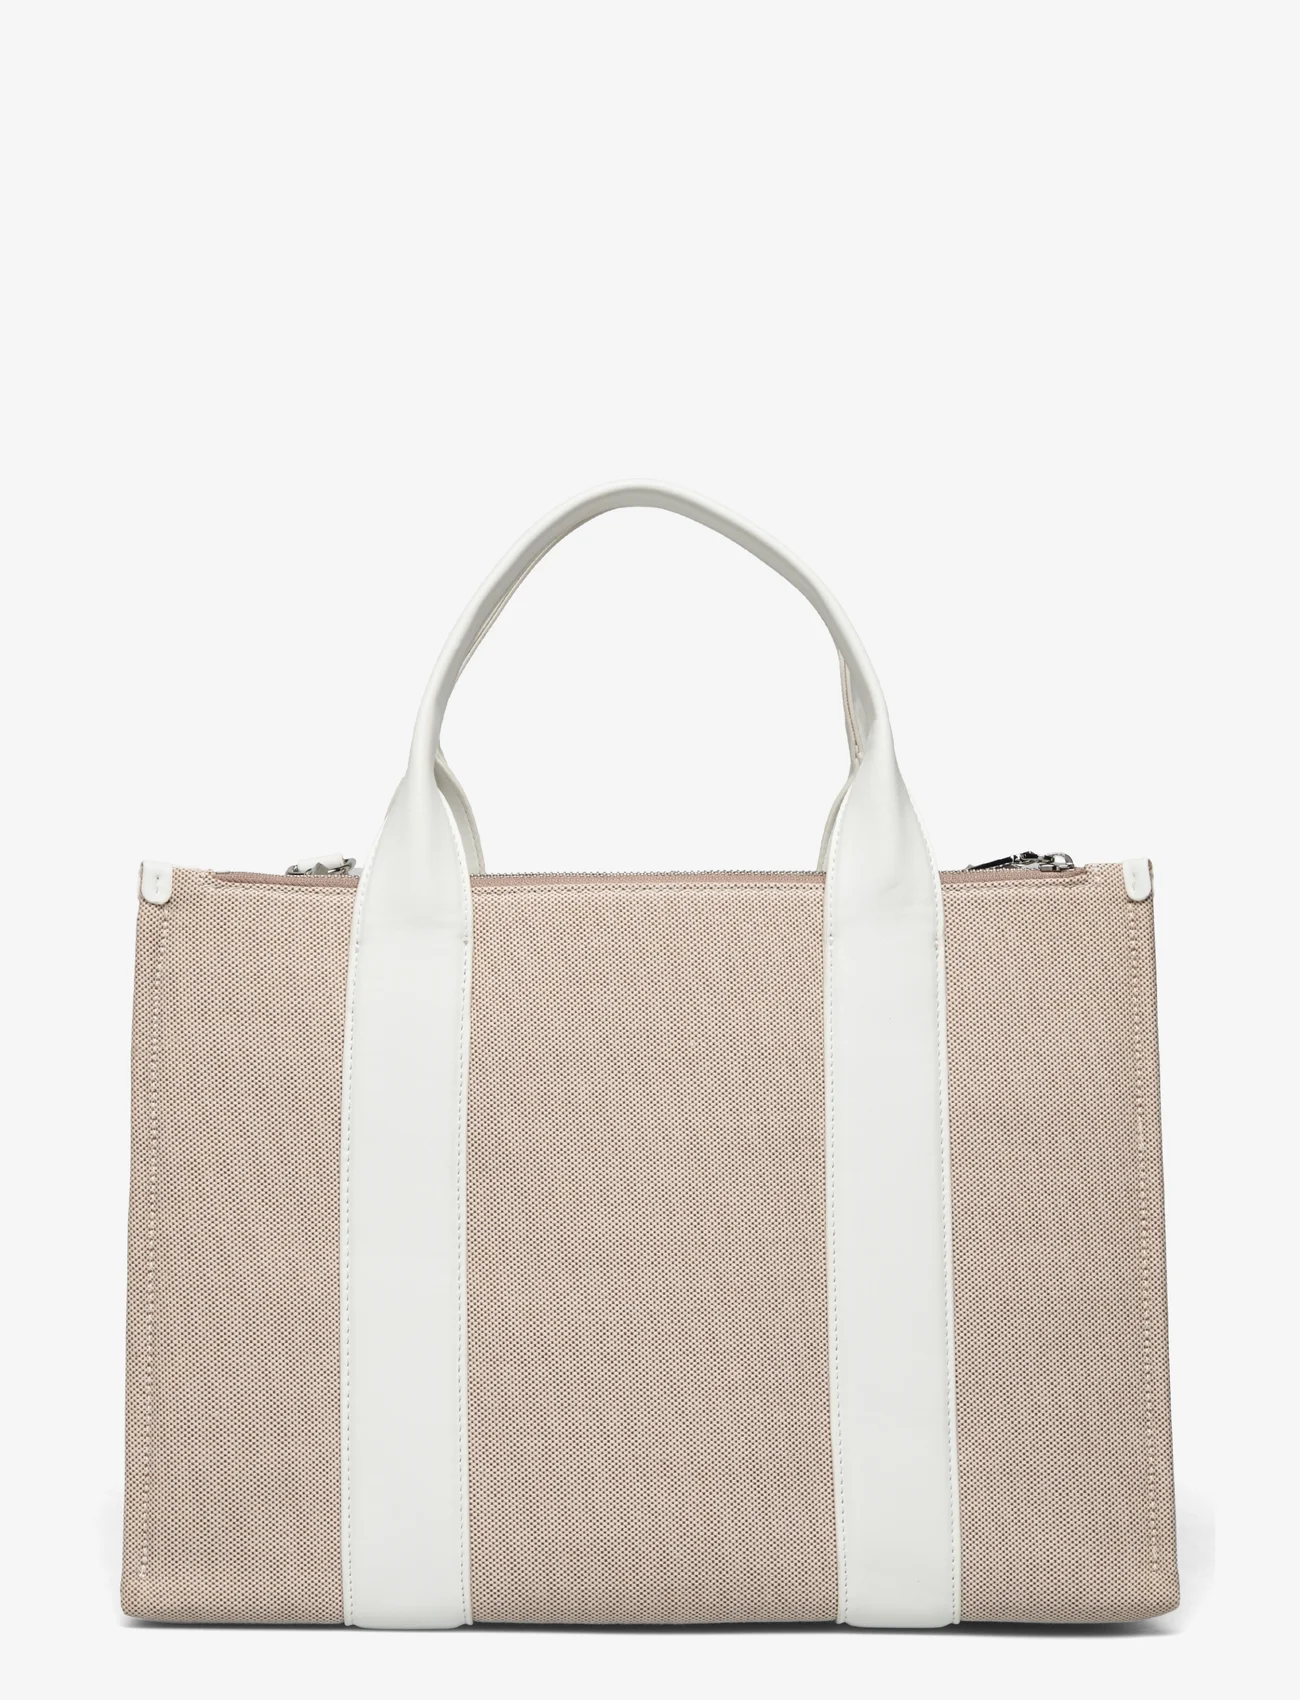 DKNY Bags - HOLLY MD TOTE - totes - nwe - nat/white - 1